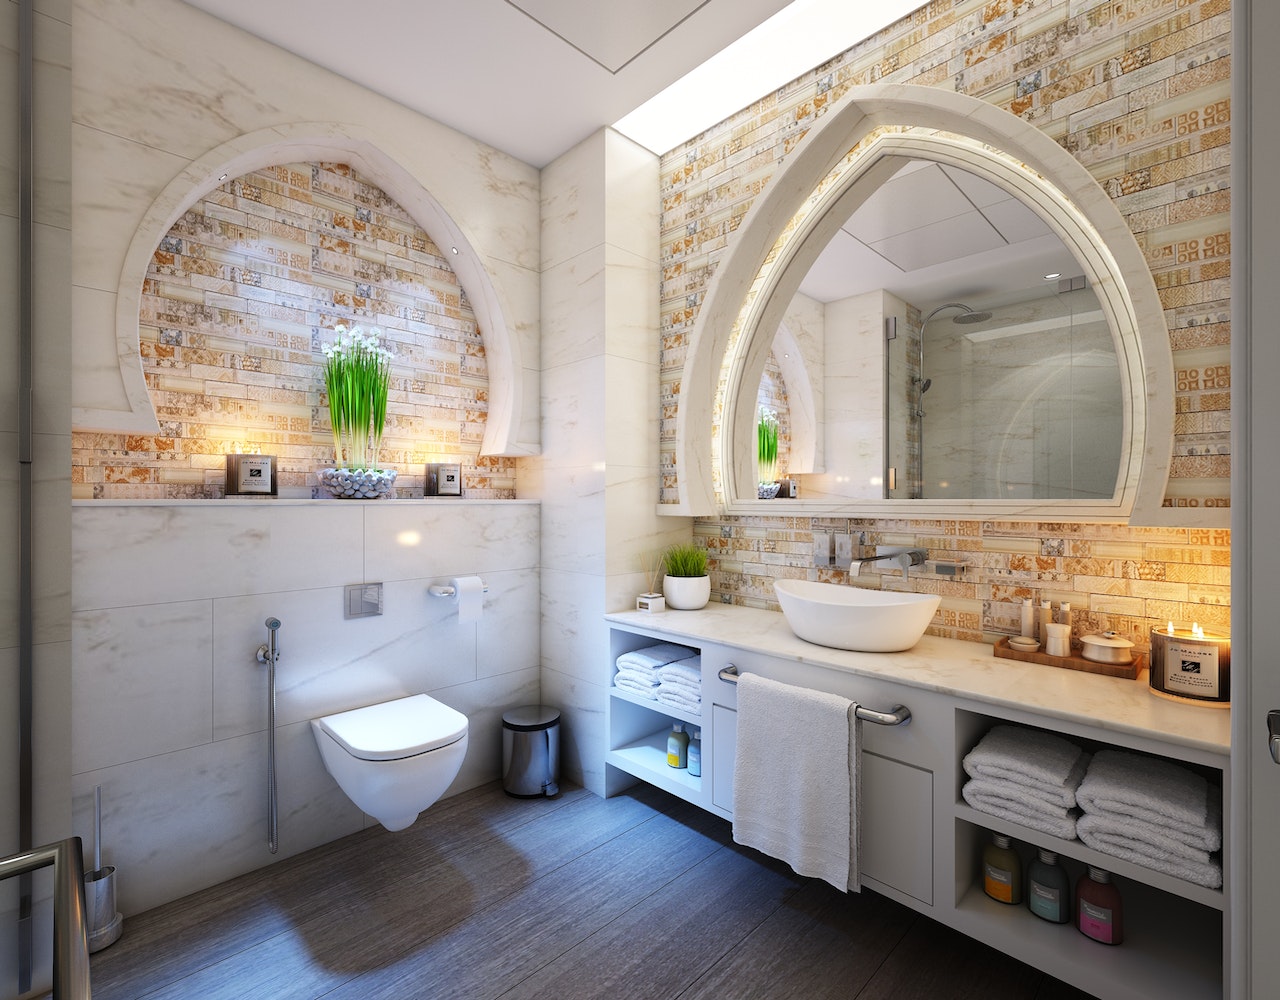 Ways to Freshen Up a Dated Bathroom